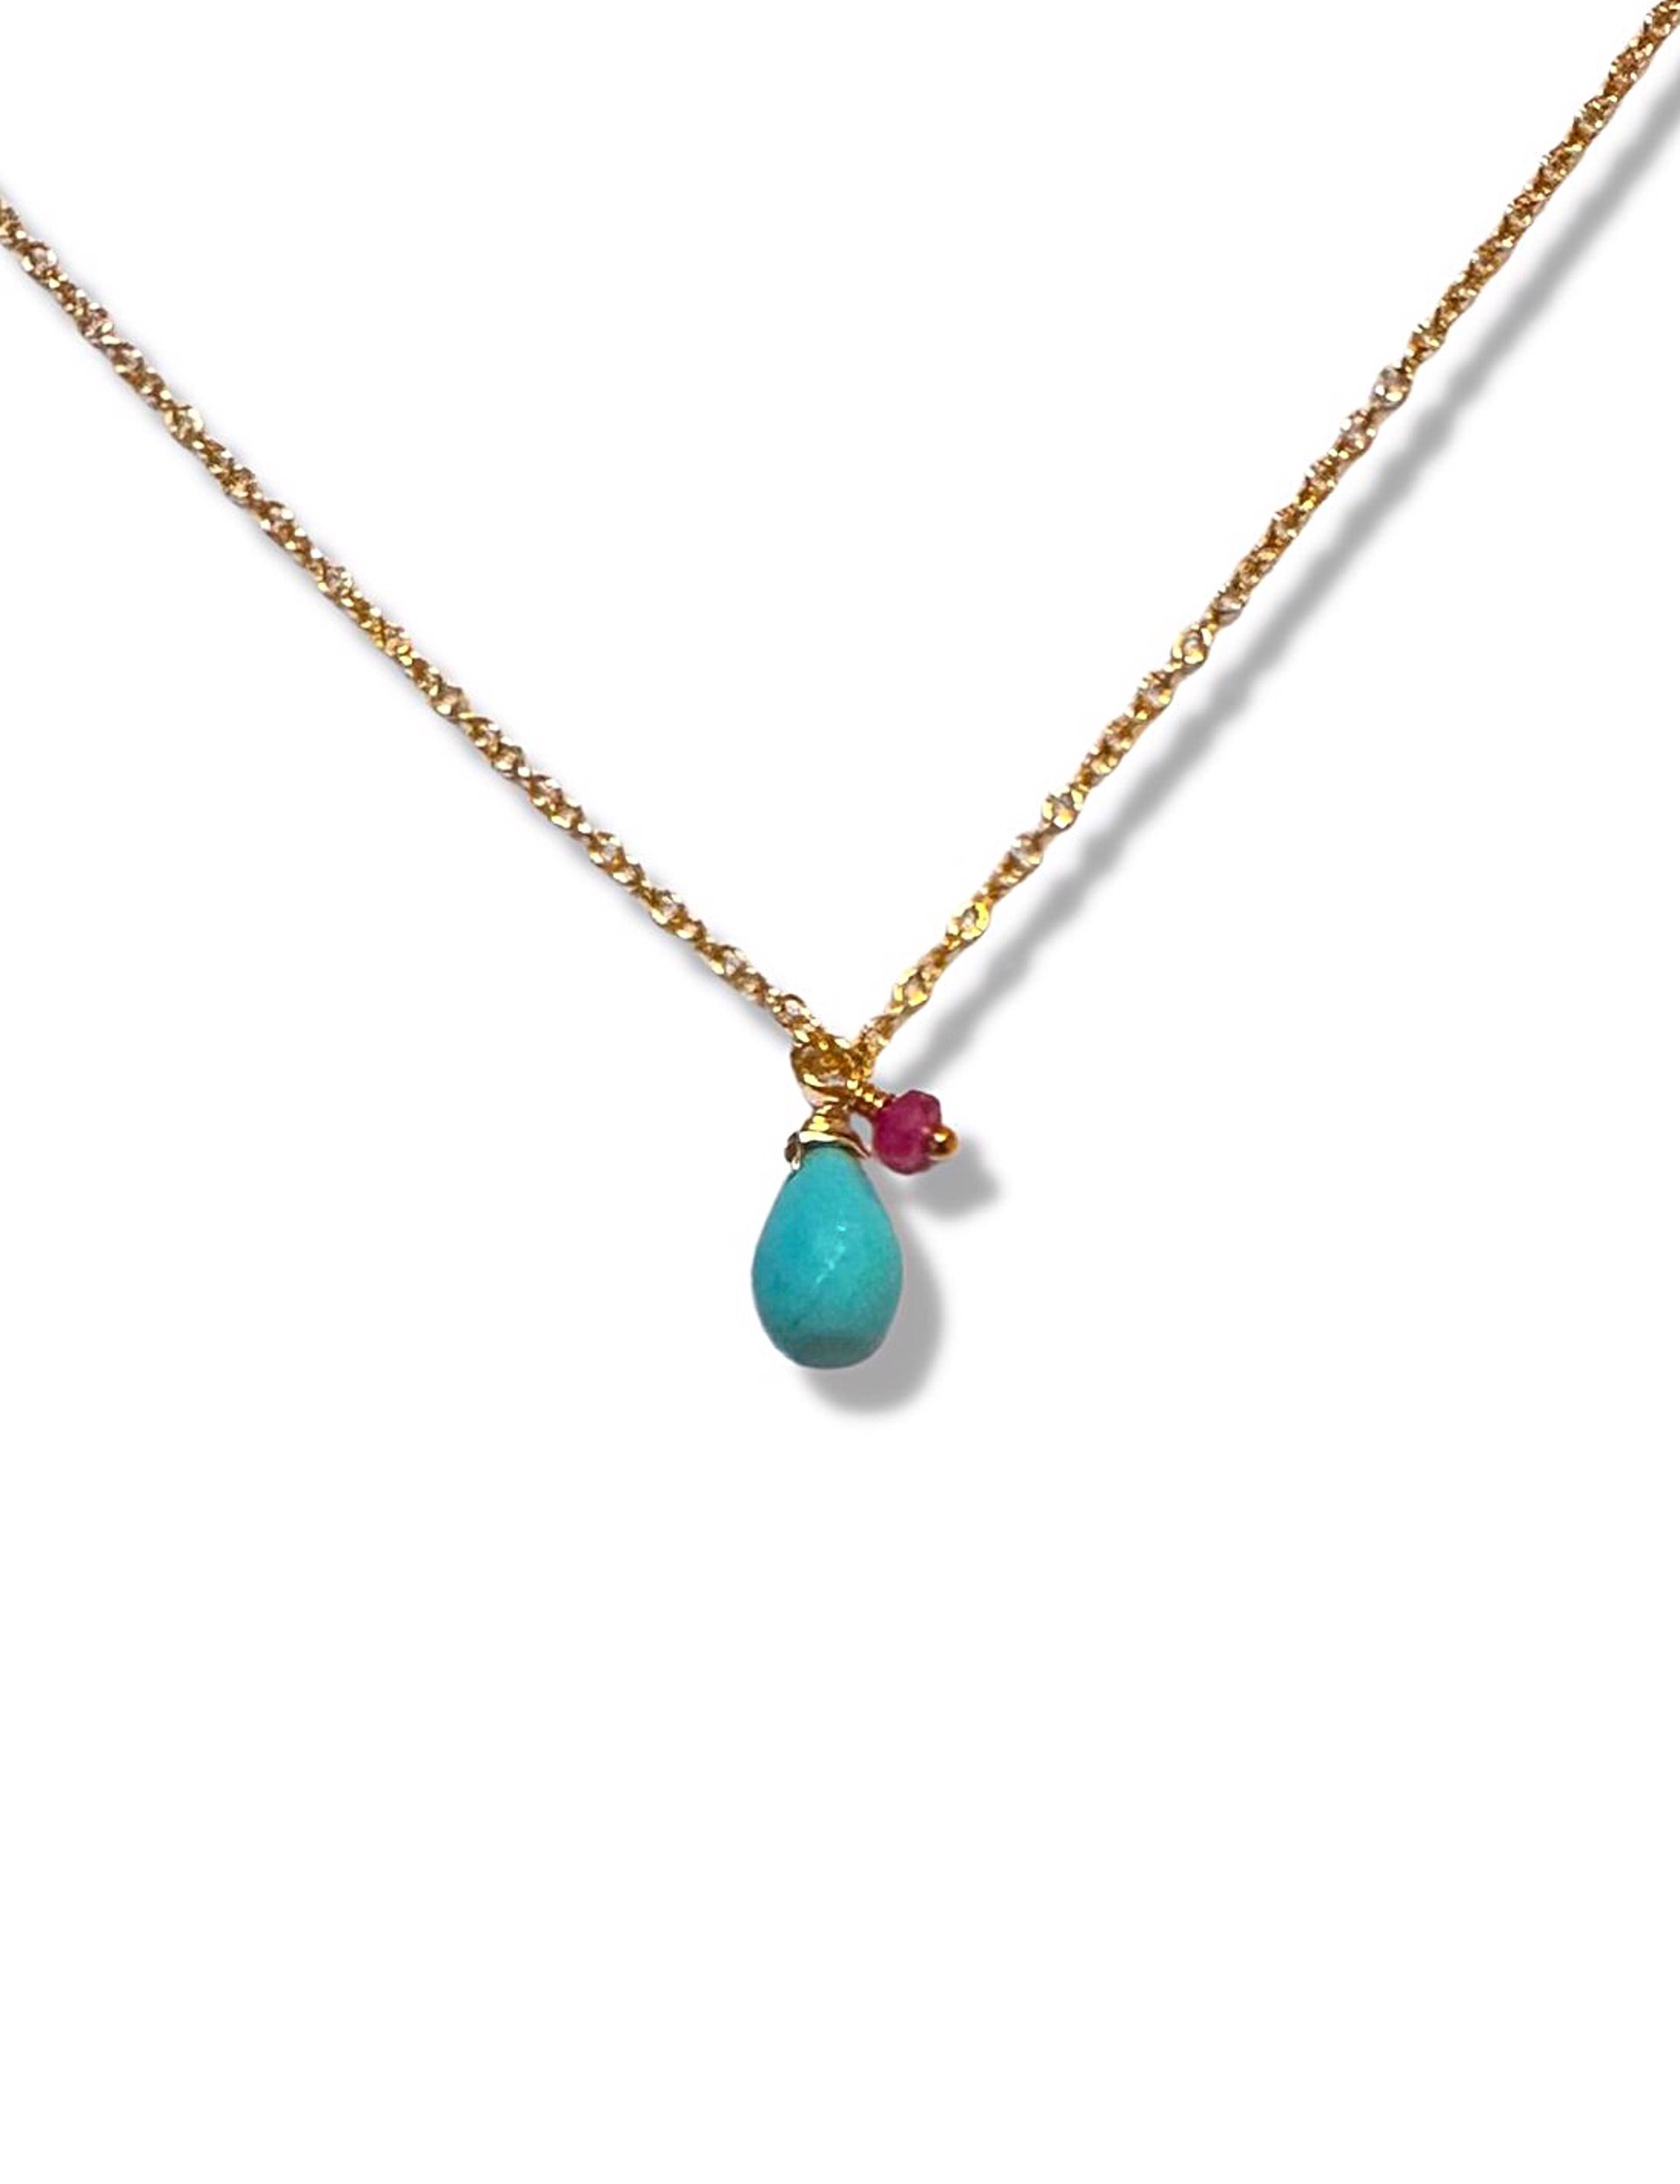 Necklace - Ruby and Sleeping Beauty Turquoise with 14K Gold Filling by Julia Balestracci